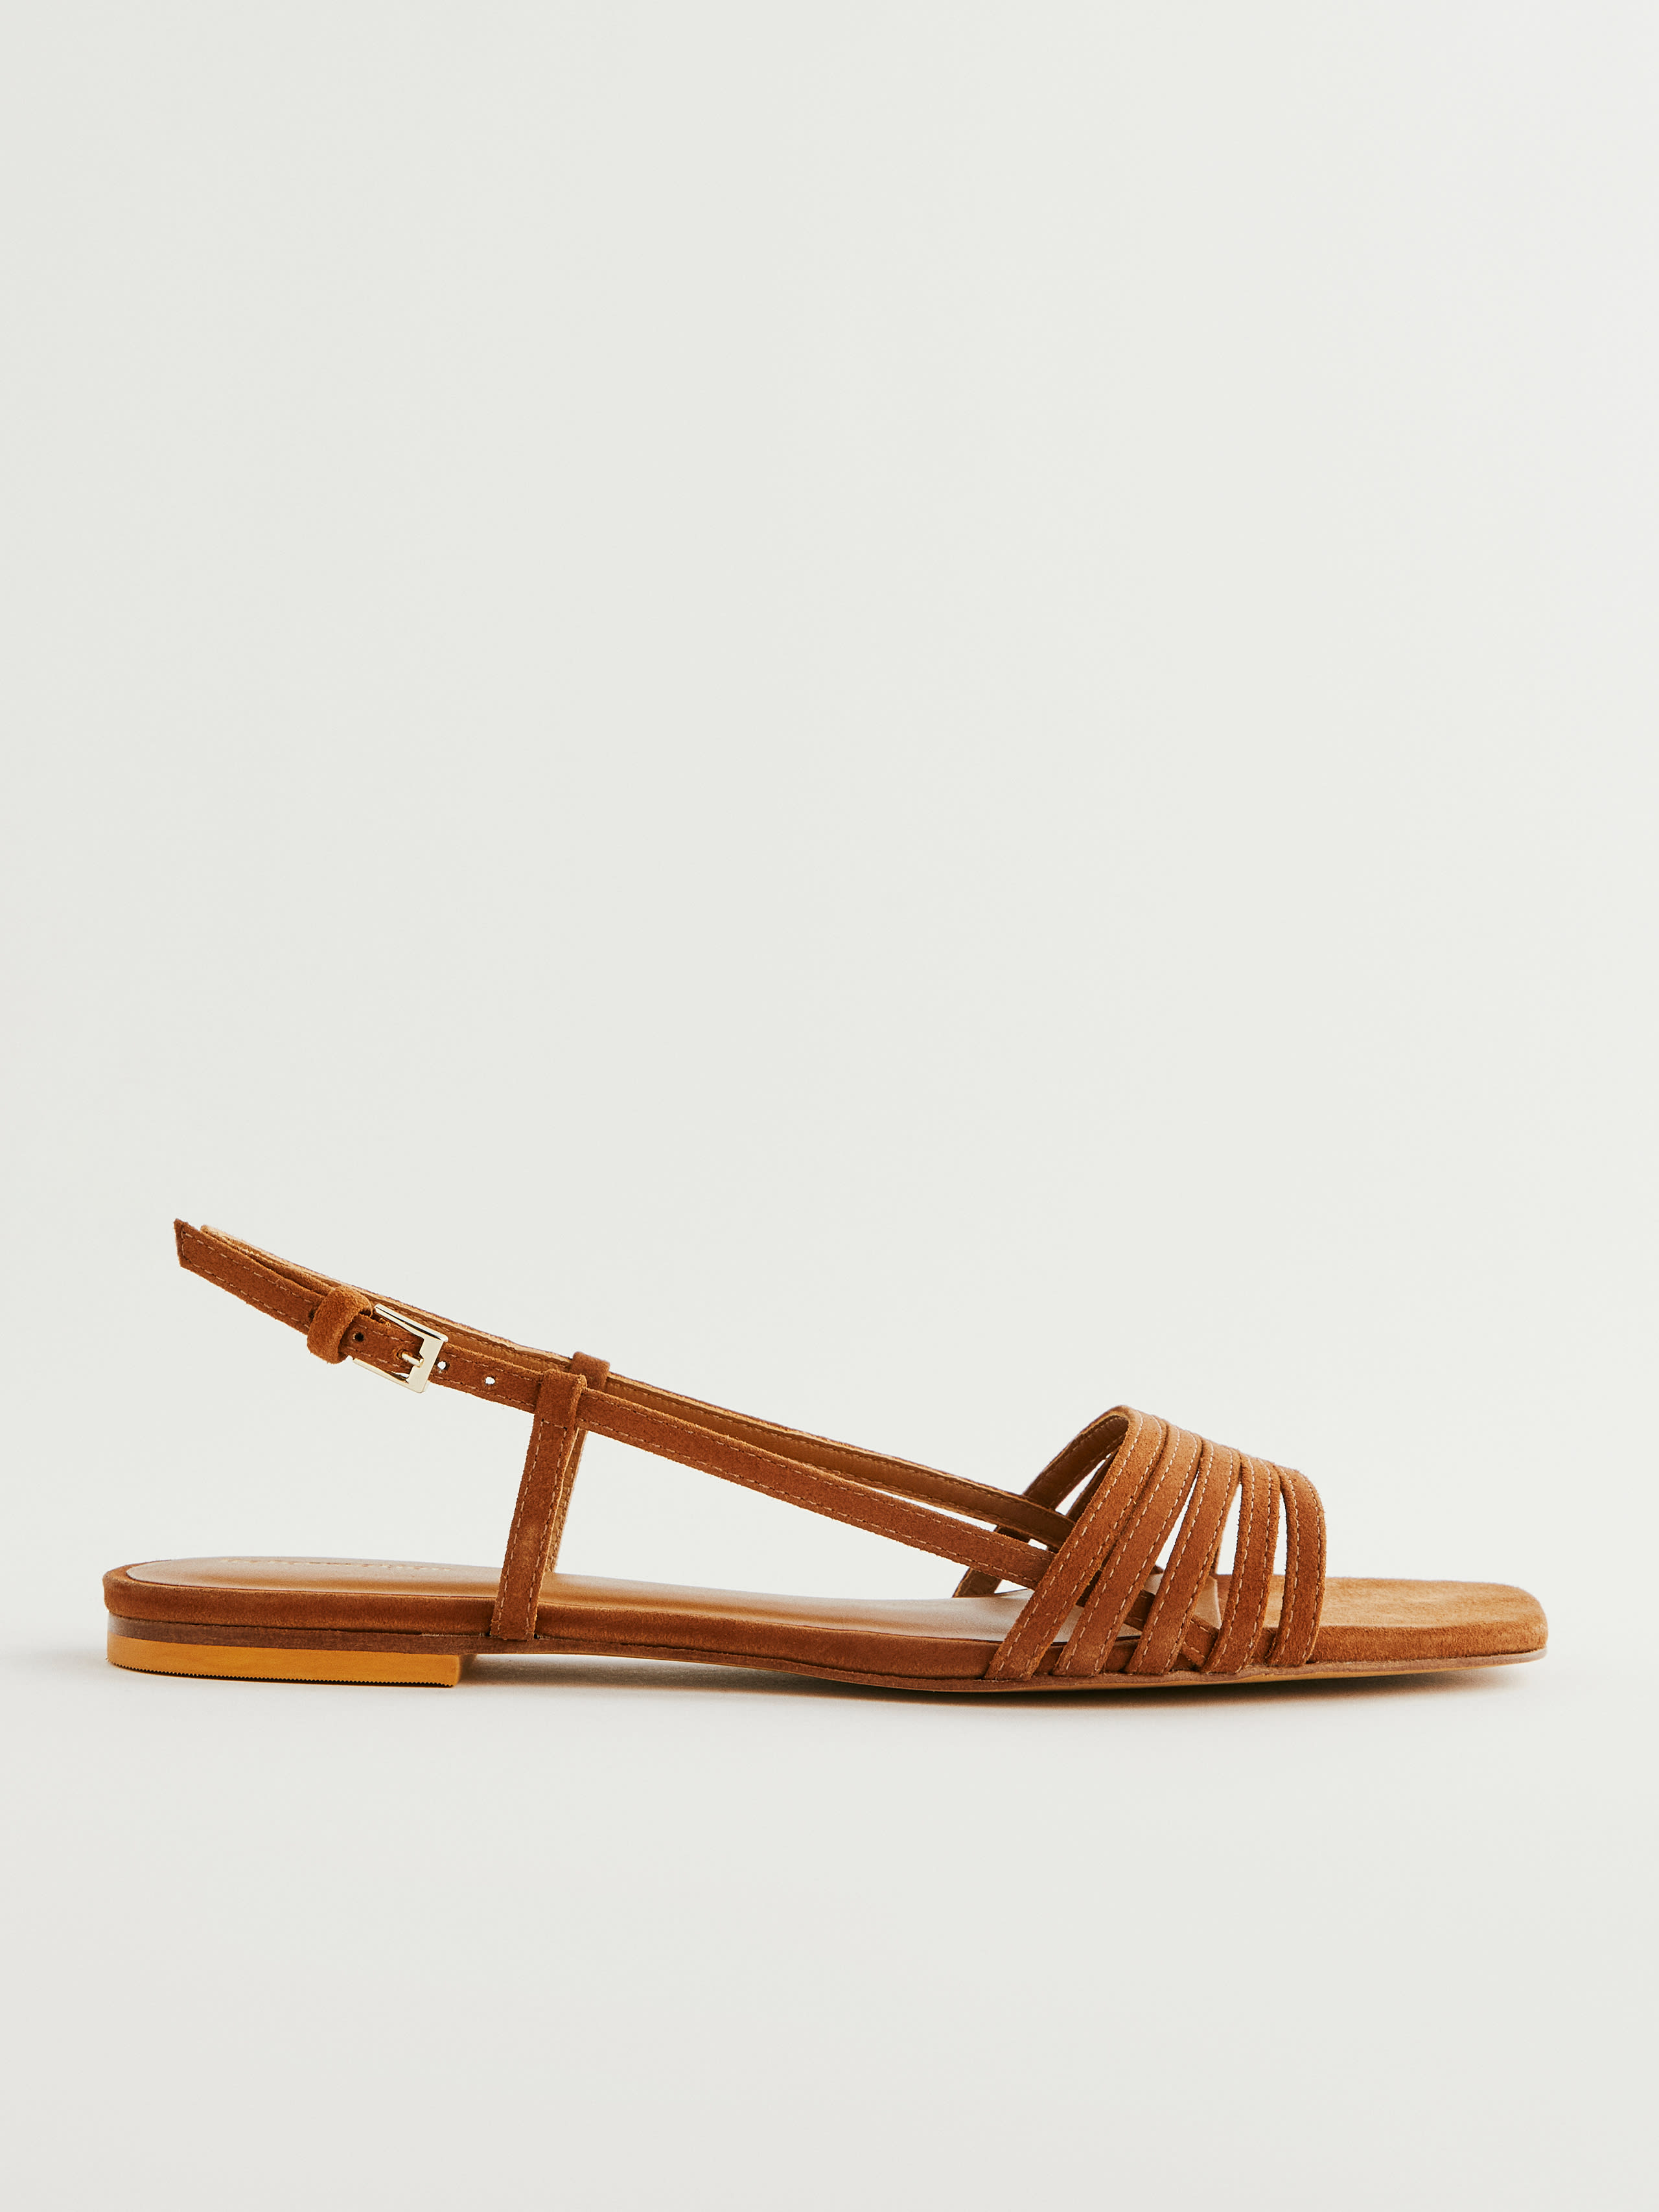 Reformation Millie Lattice Flat Sandal In Toasted Brown Suede